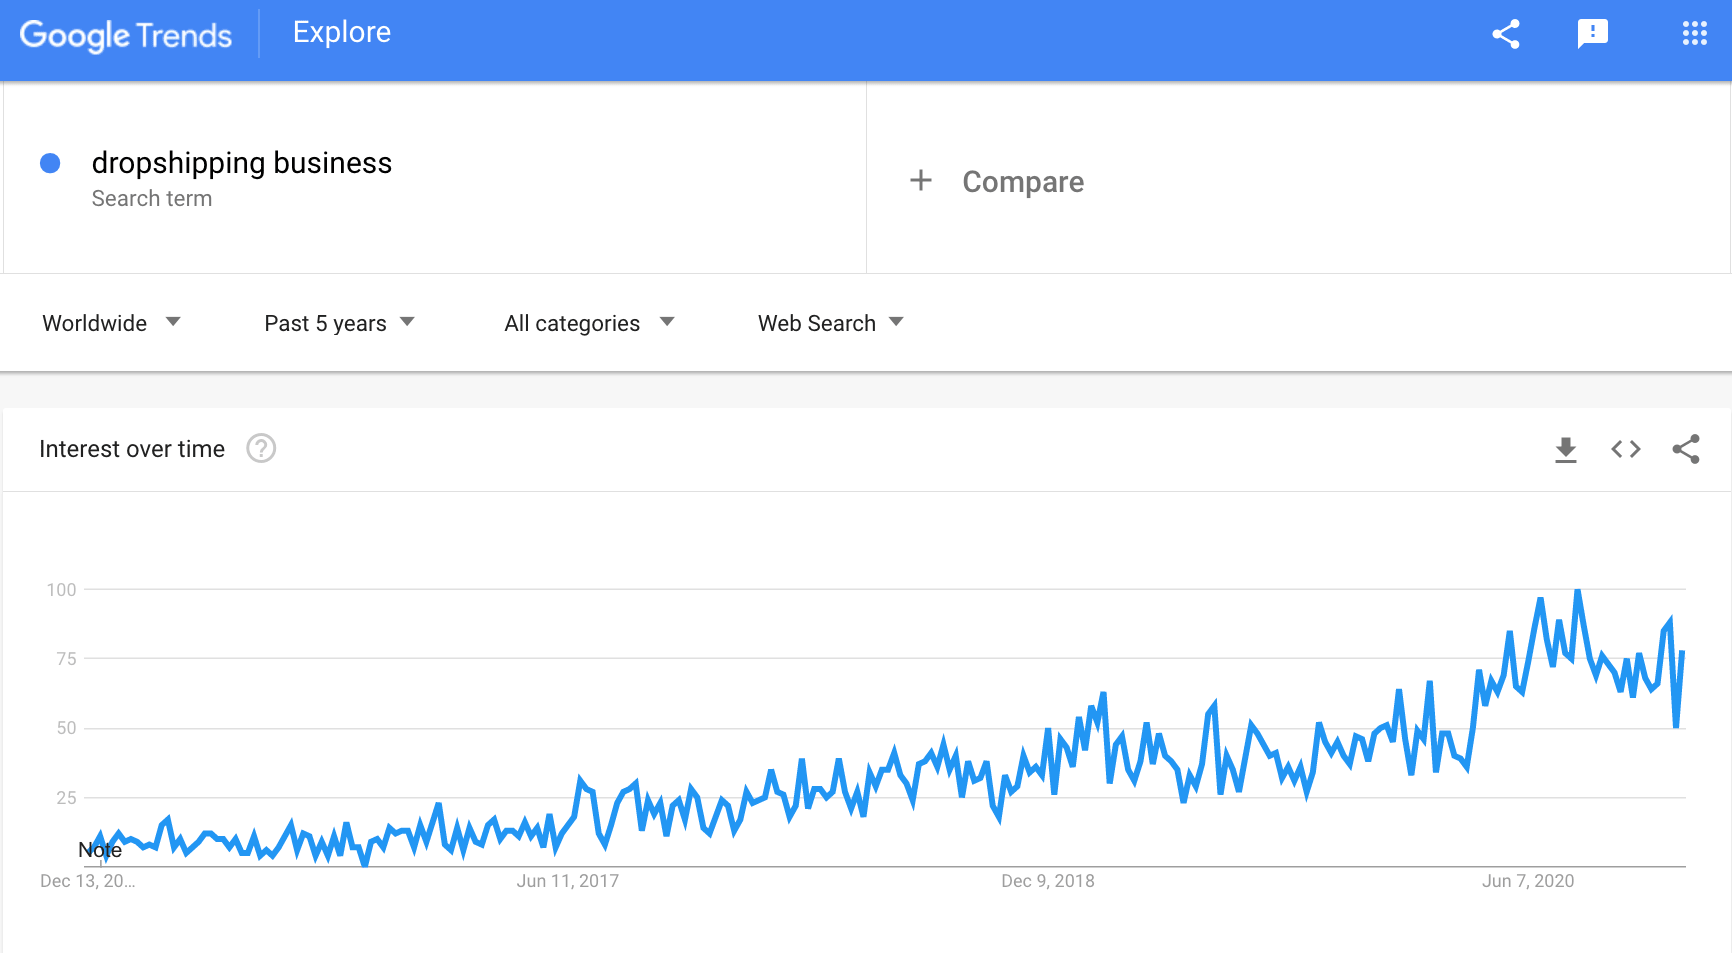 a picture showing the number of dropshipping business search request